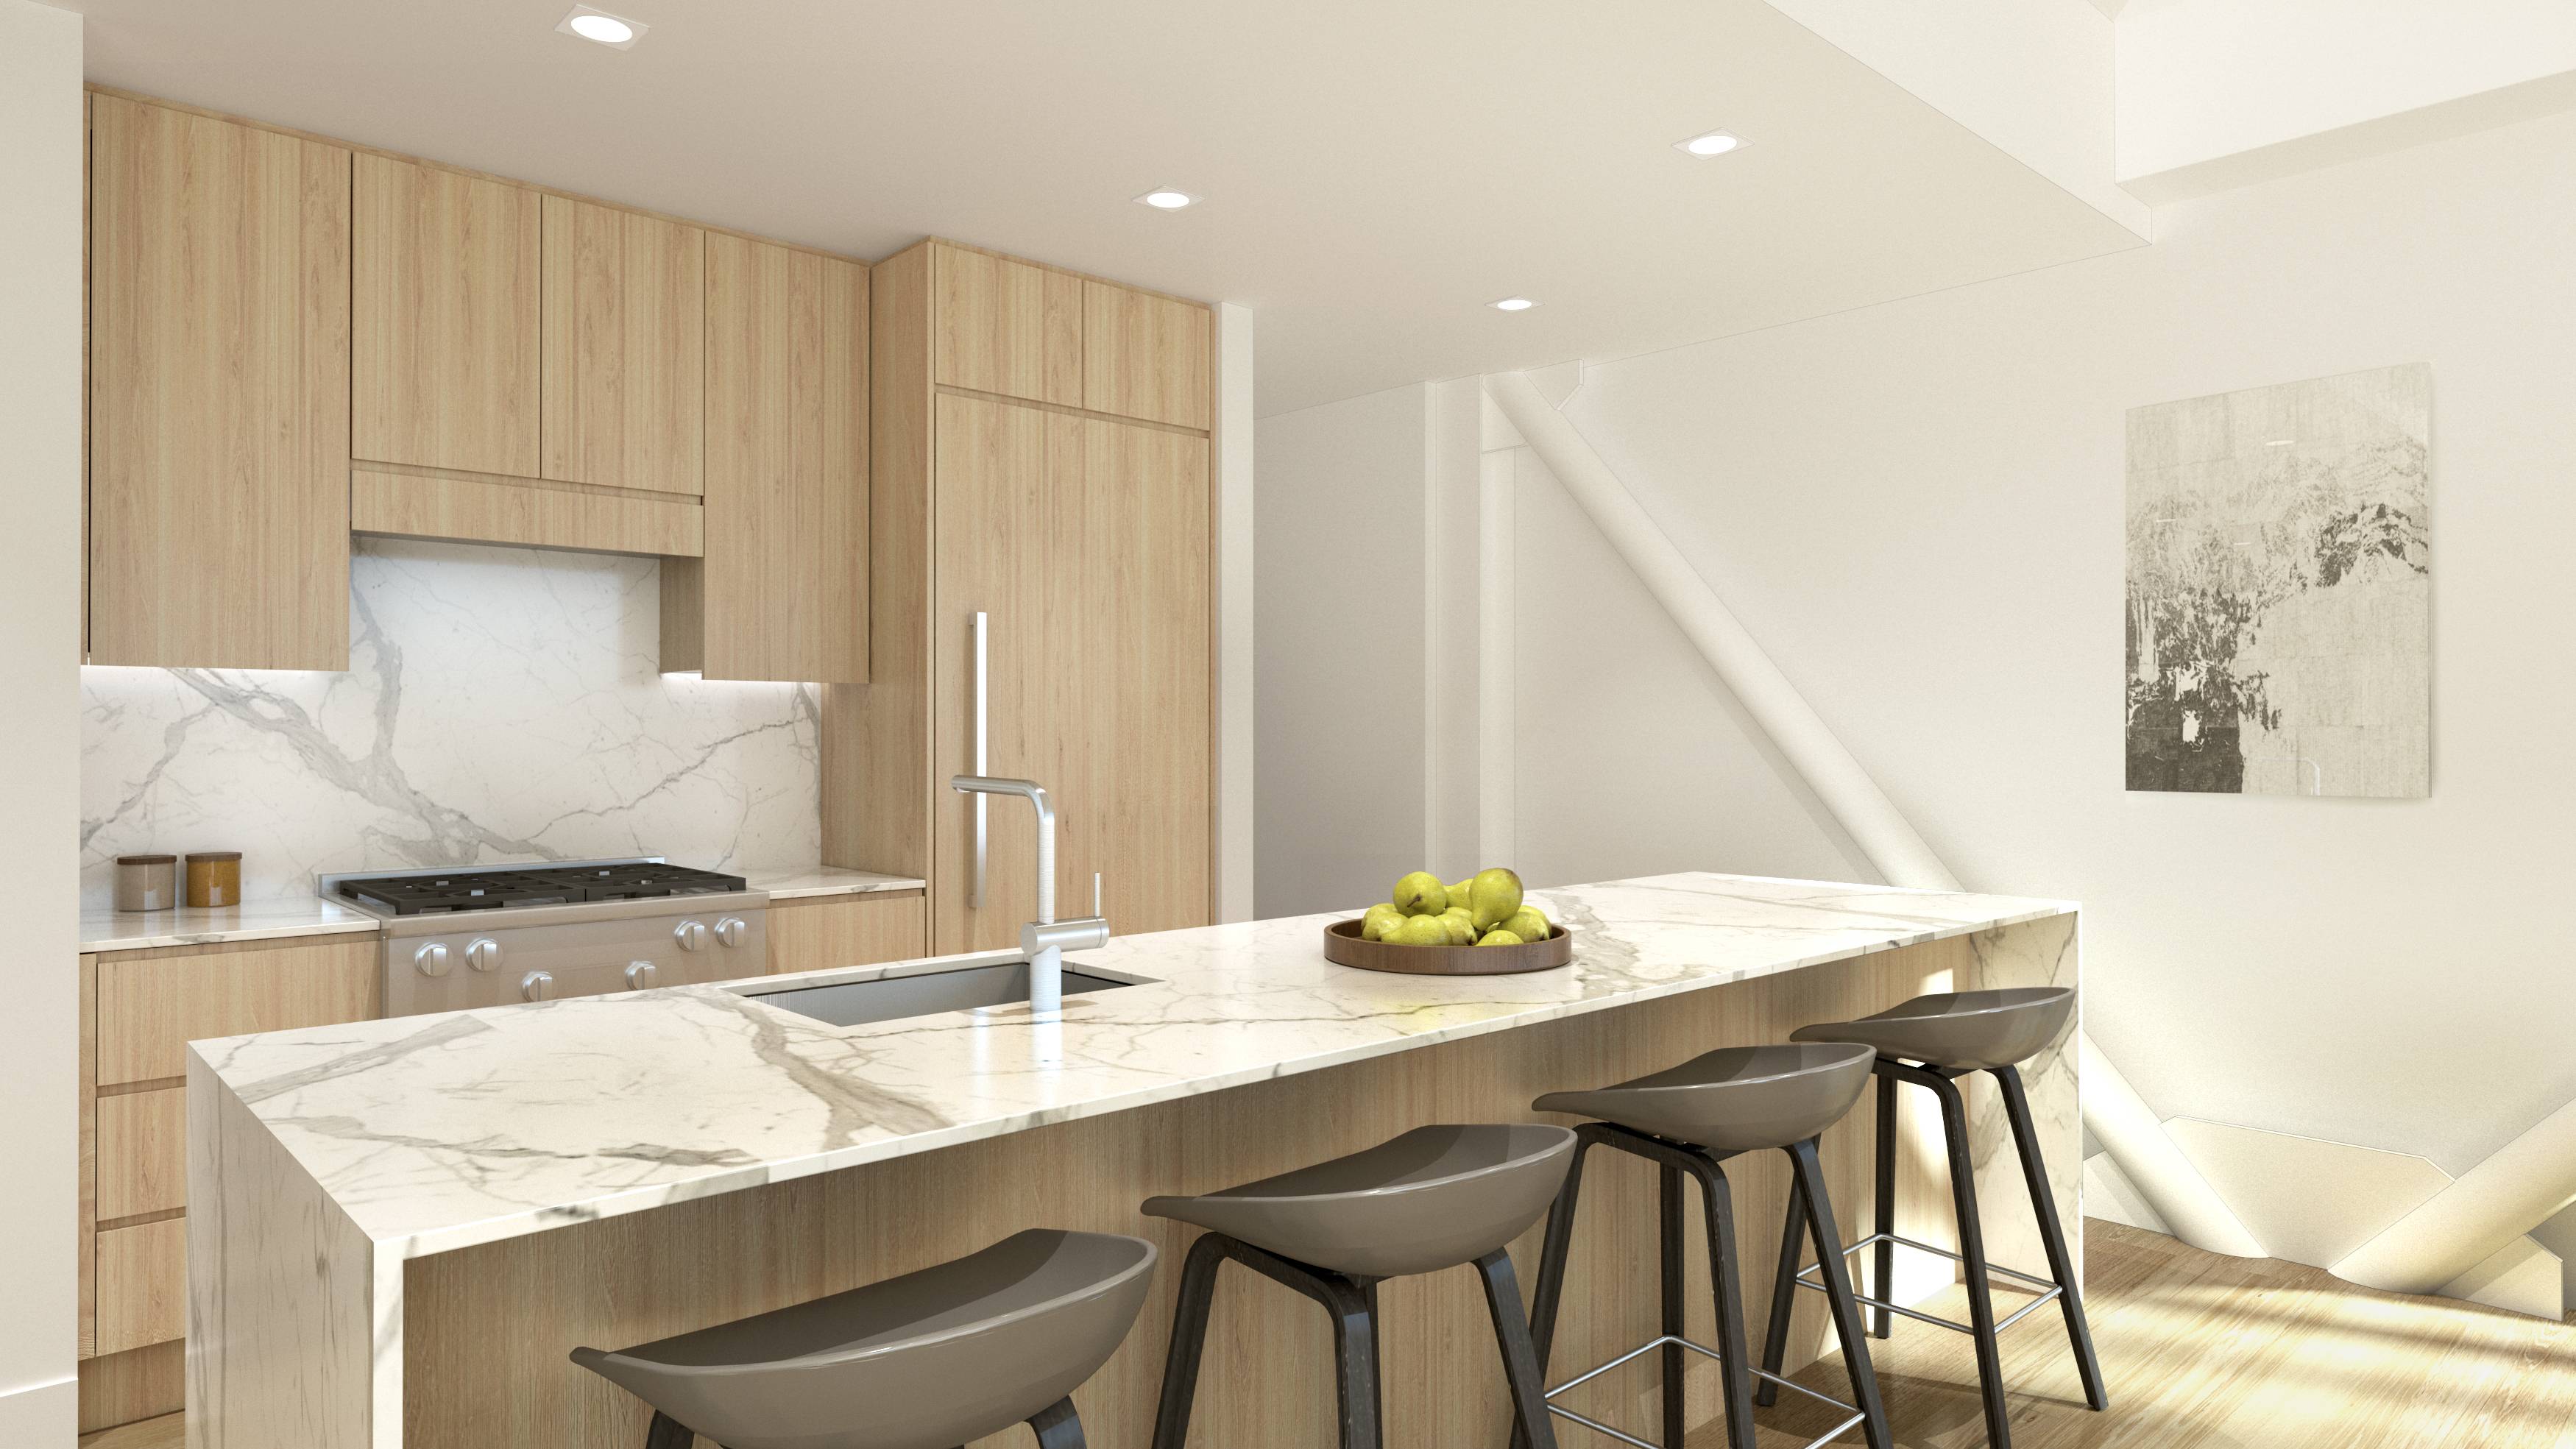 Be the FIRST to live in this this stunning 1 bedroom condominium residence is located right in the heart of the fastest growing area of East Williamsburg, Brooklyn.